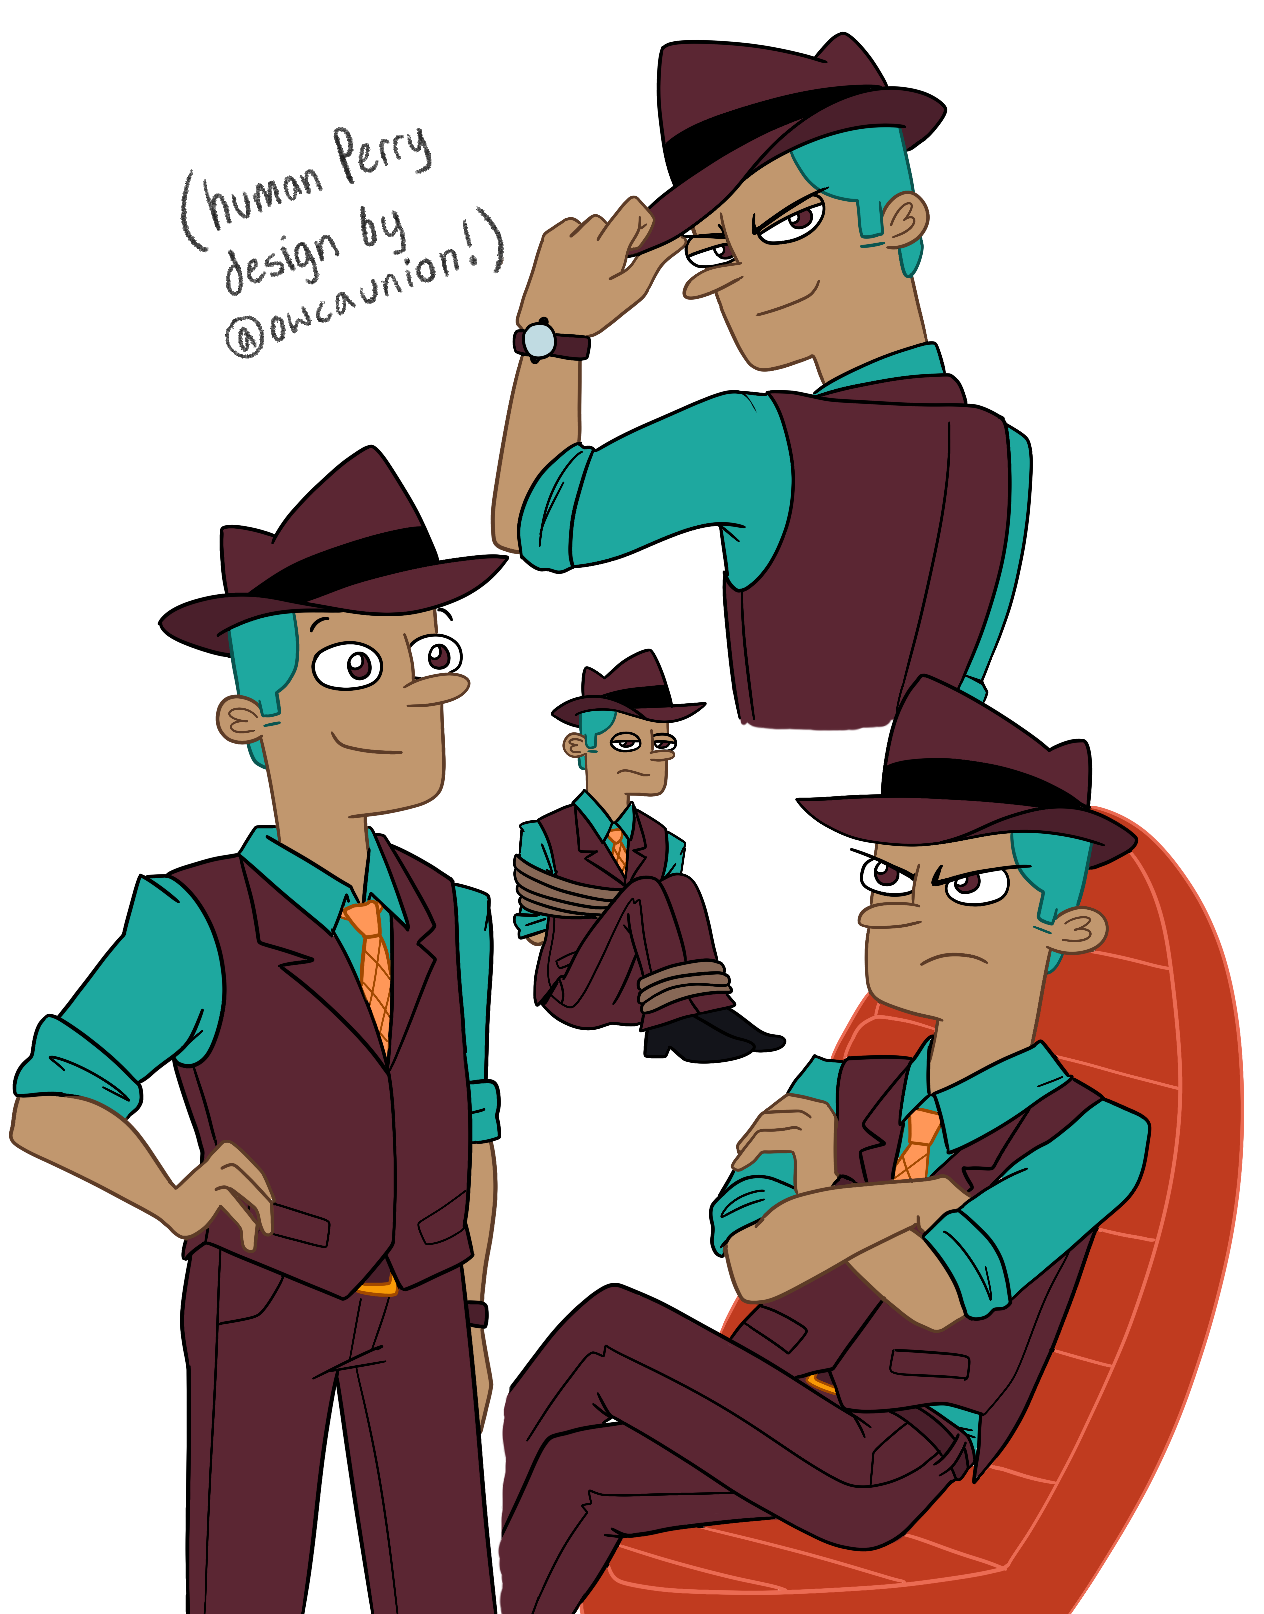 Human perry the platypus